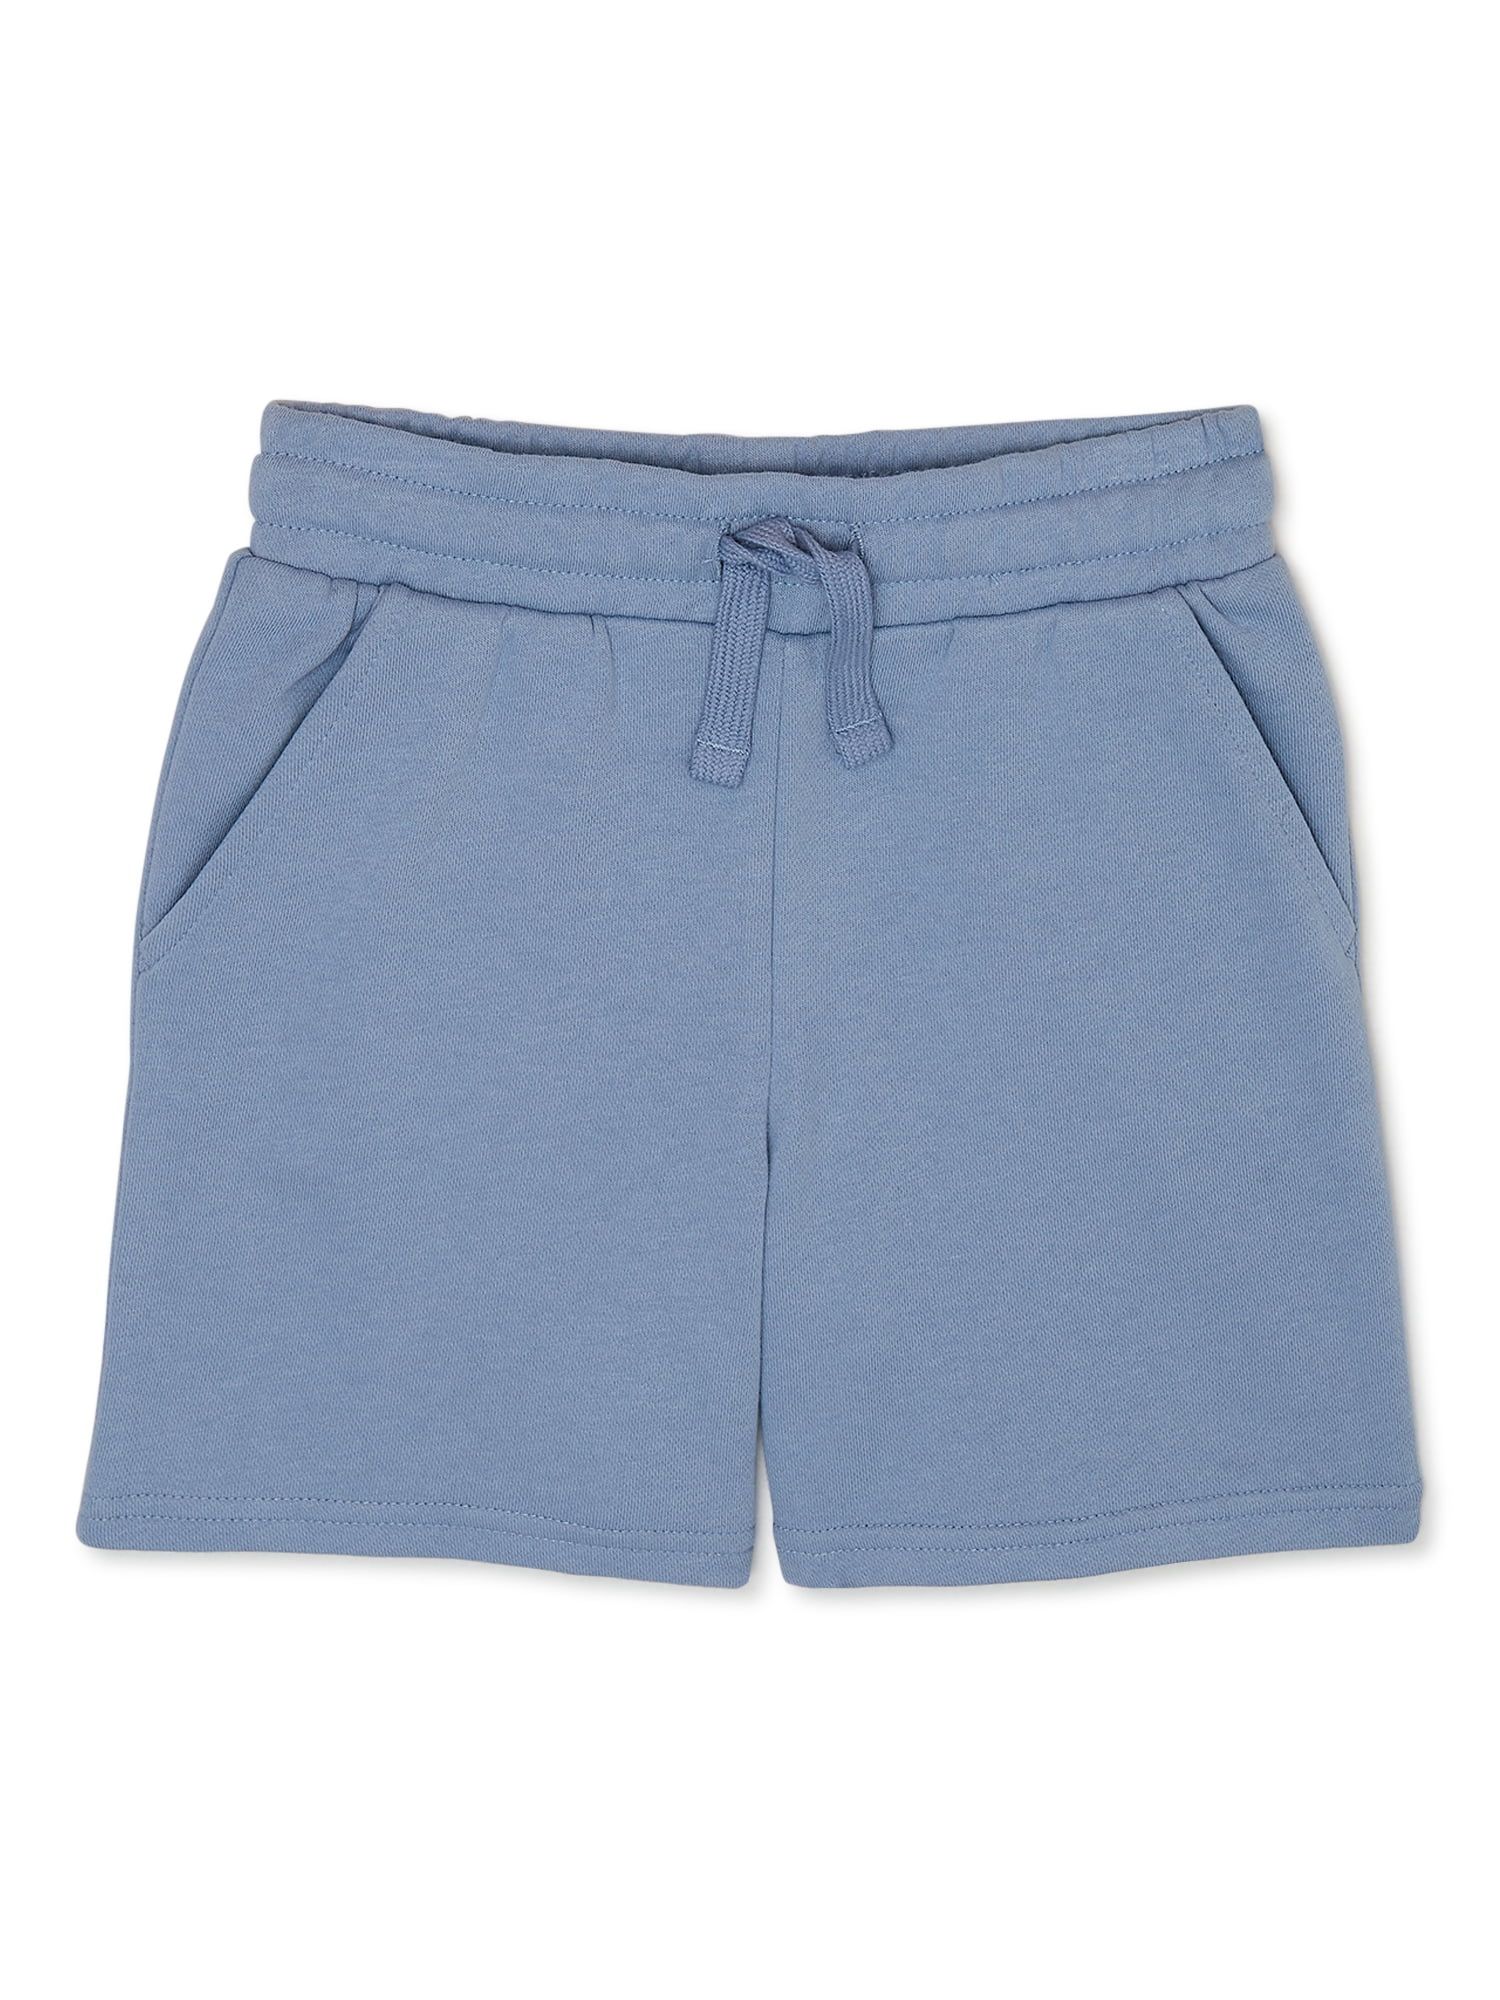 365 Kids from Garanimals Boys Mix and Match French Terry Shorts, Sizes 4-10 | Walmart (US)